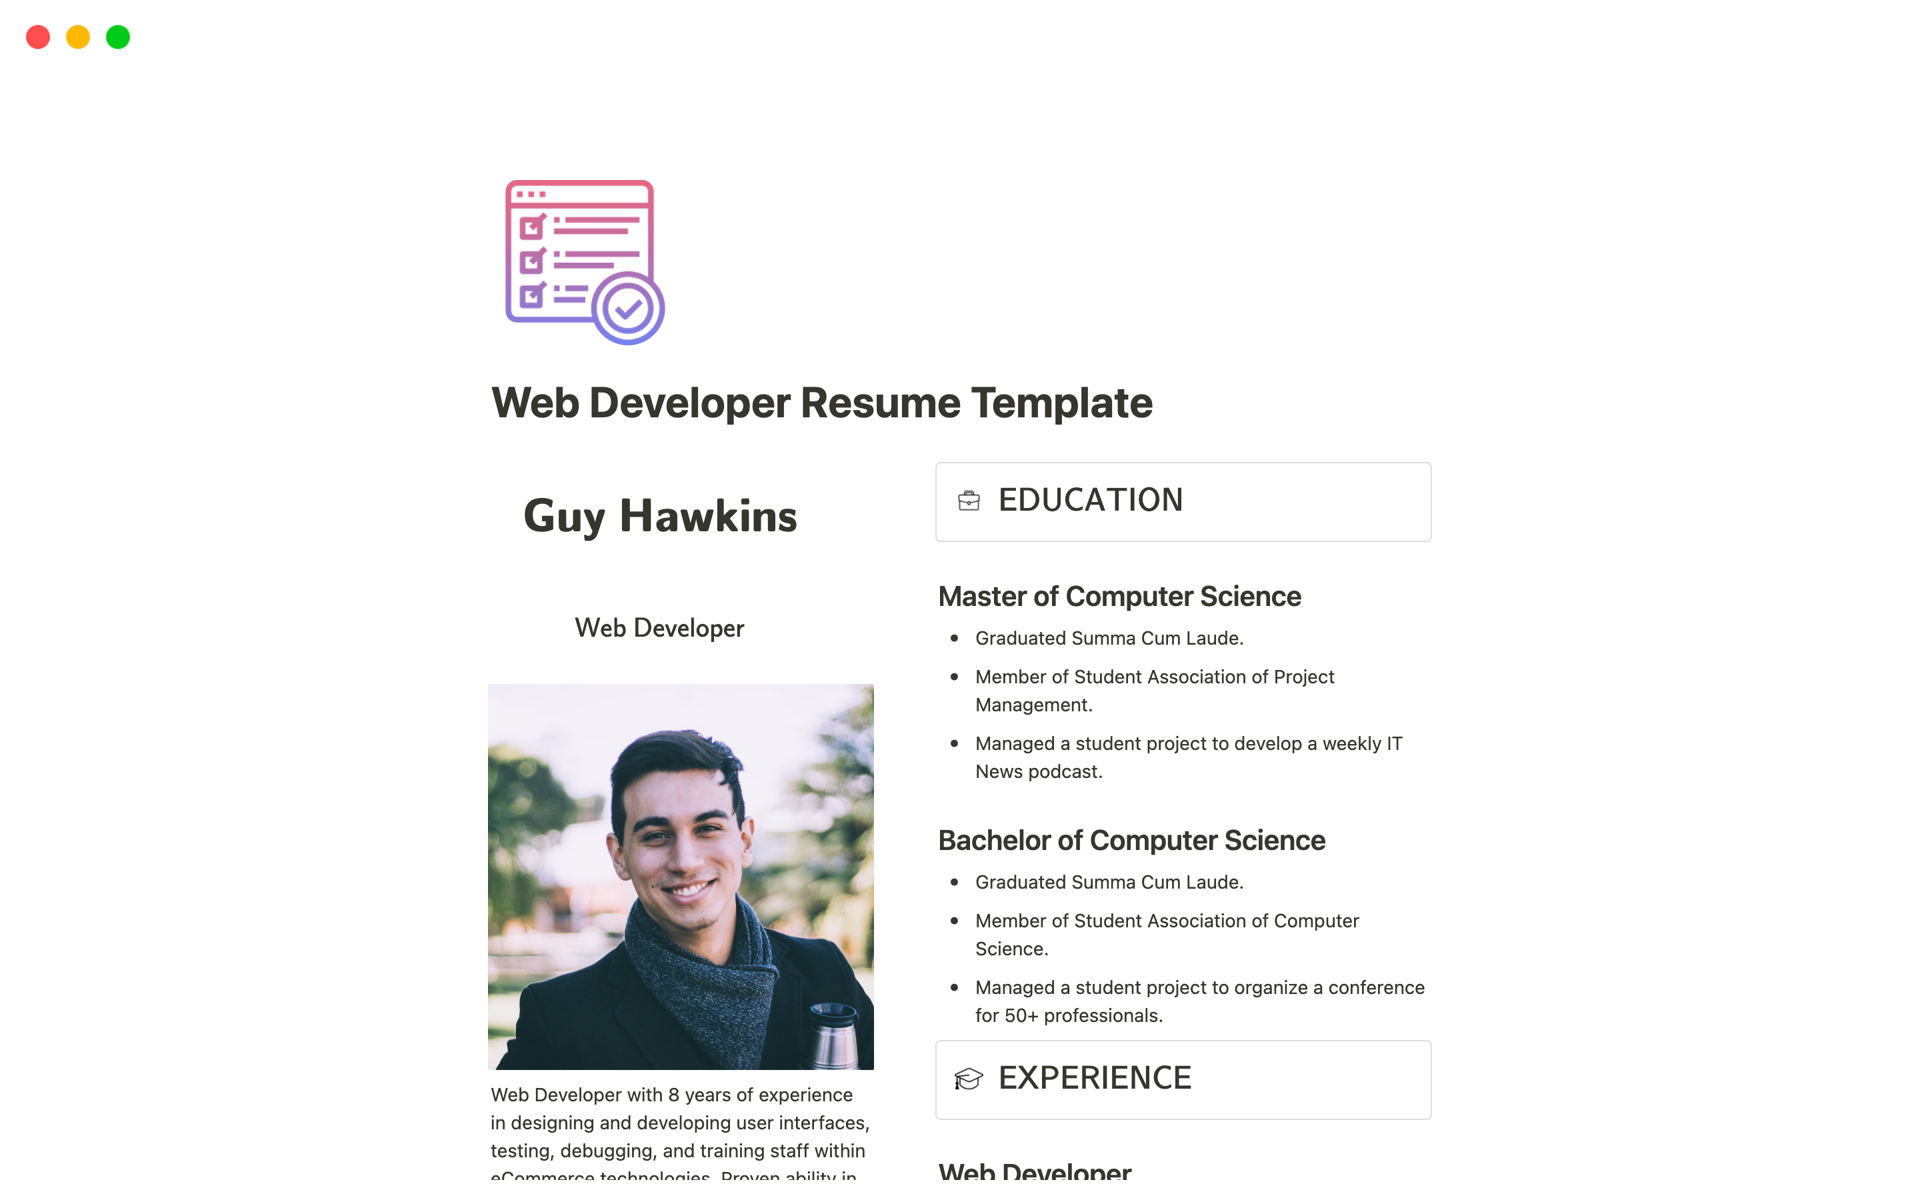 A template preview for Web Developer Resume